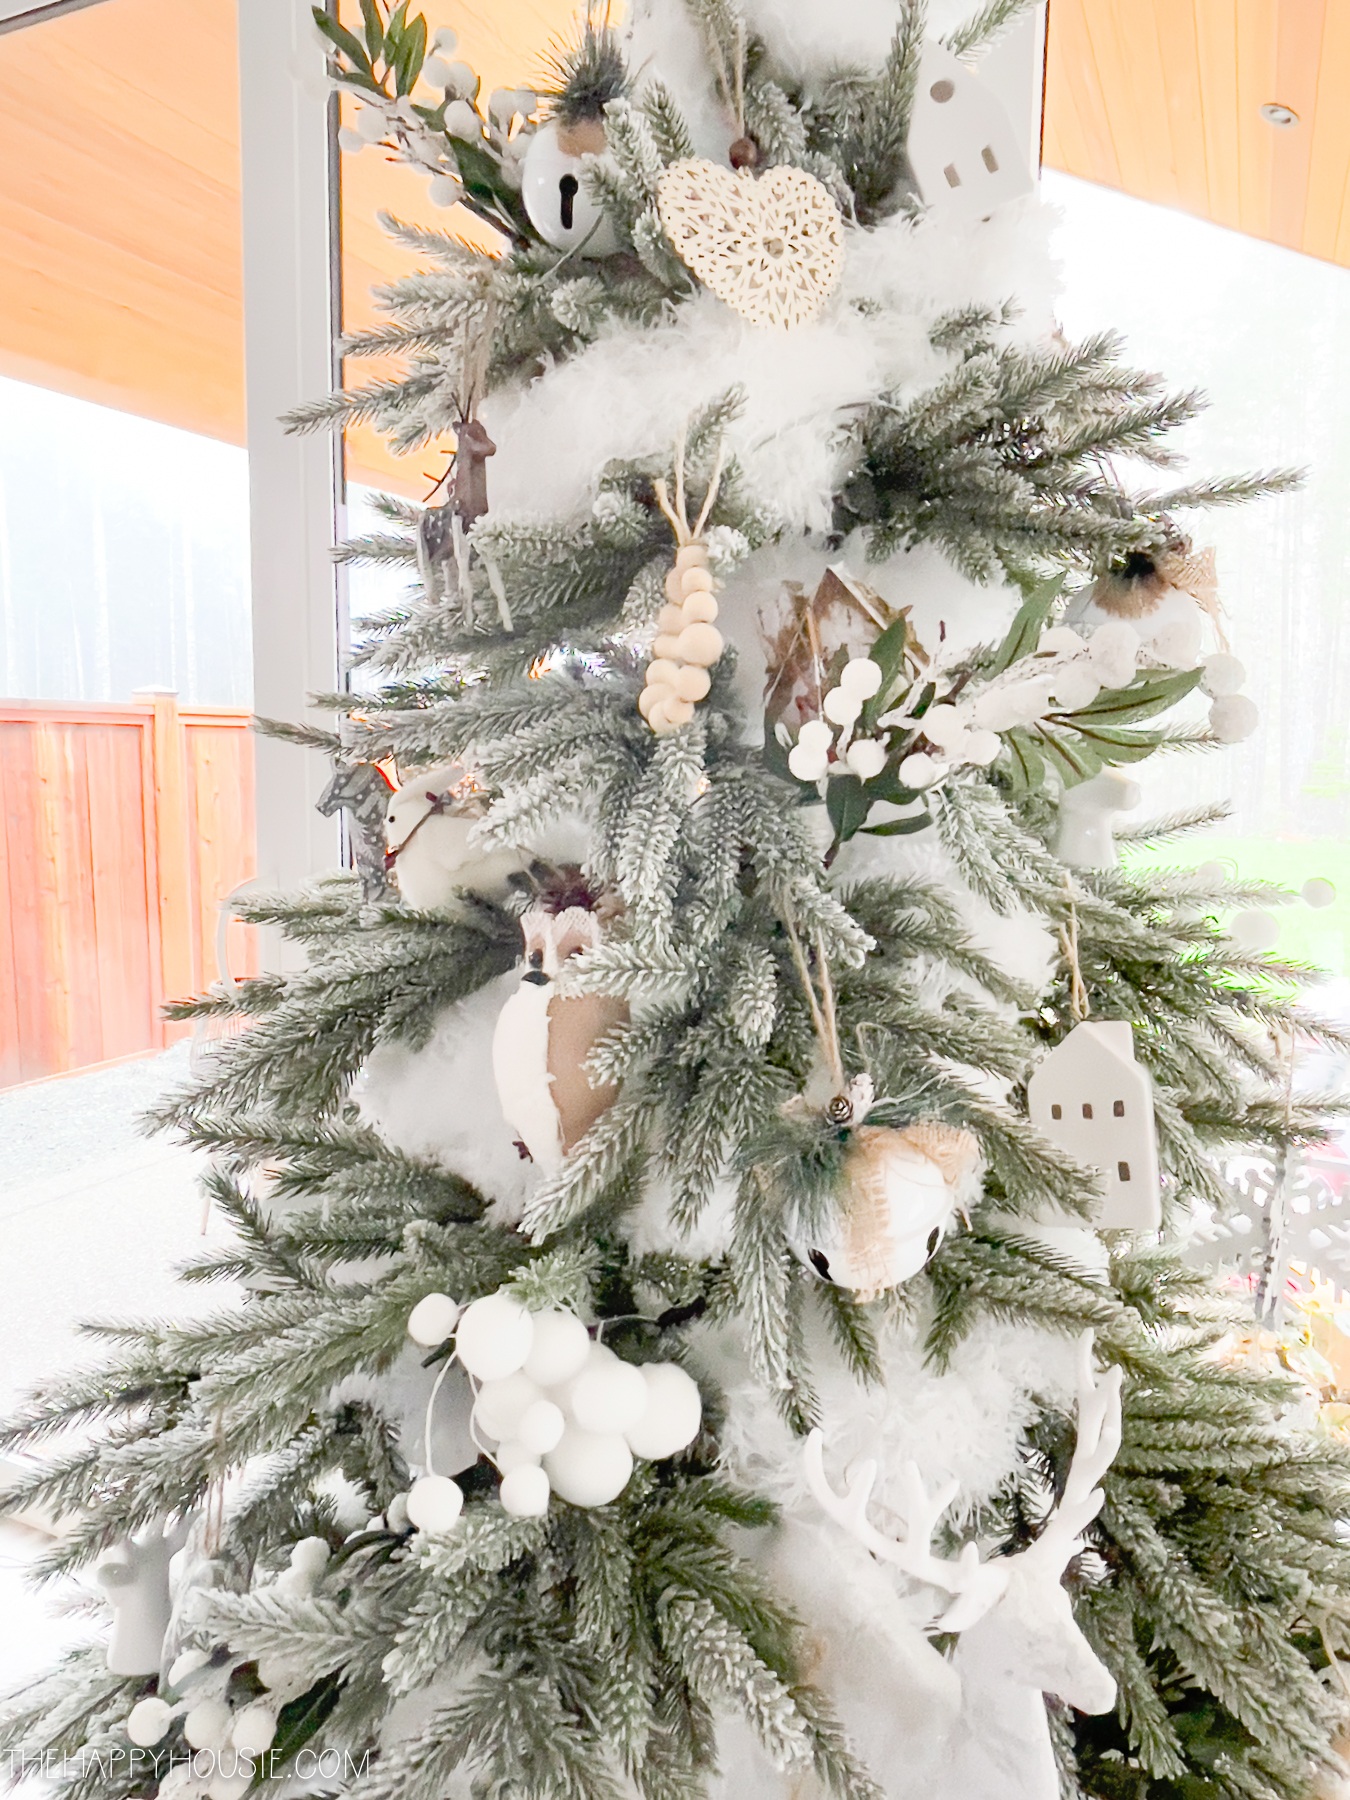 There is white Christmas items on the tree.